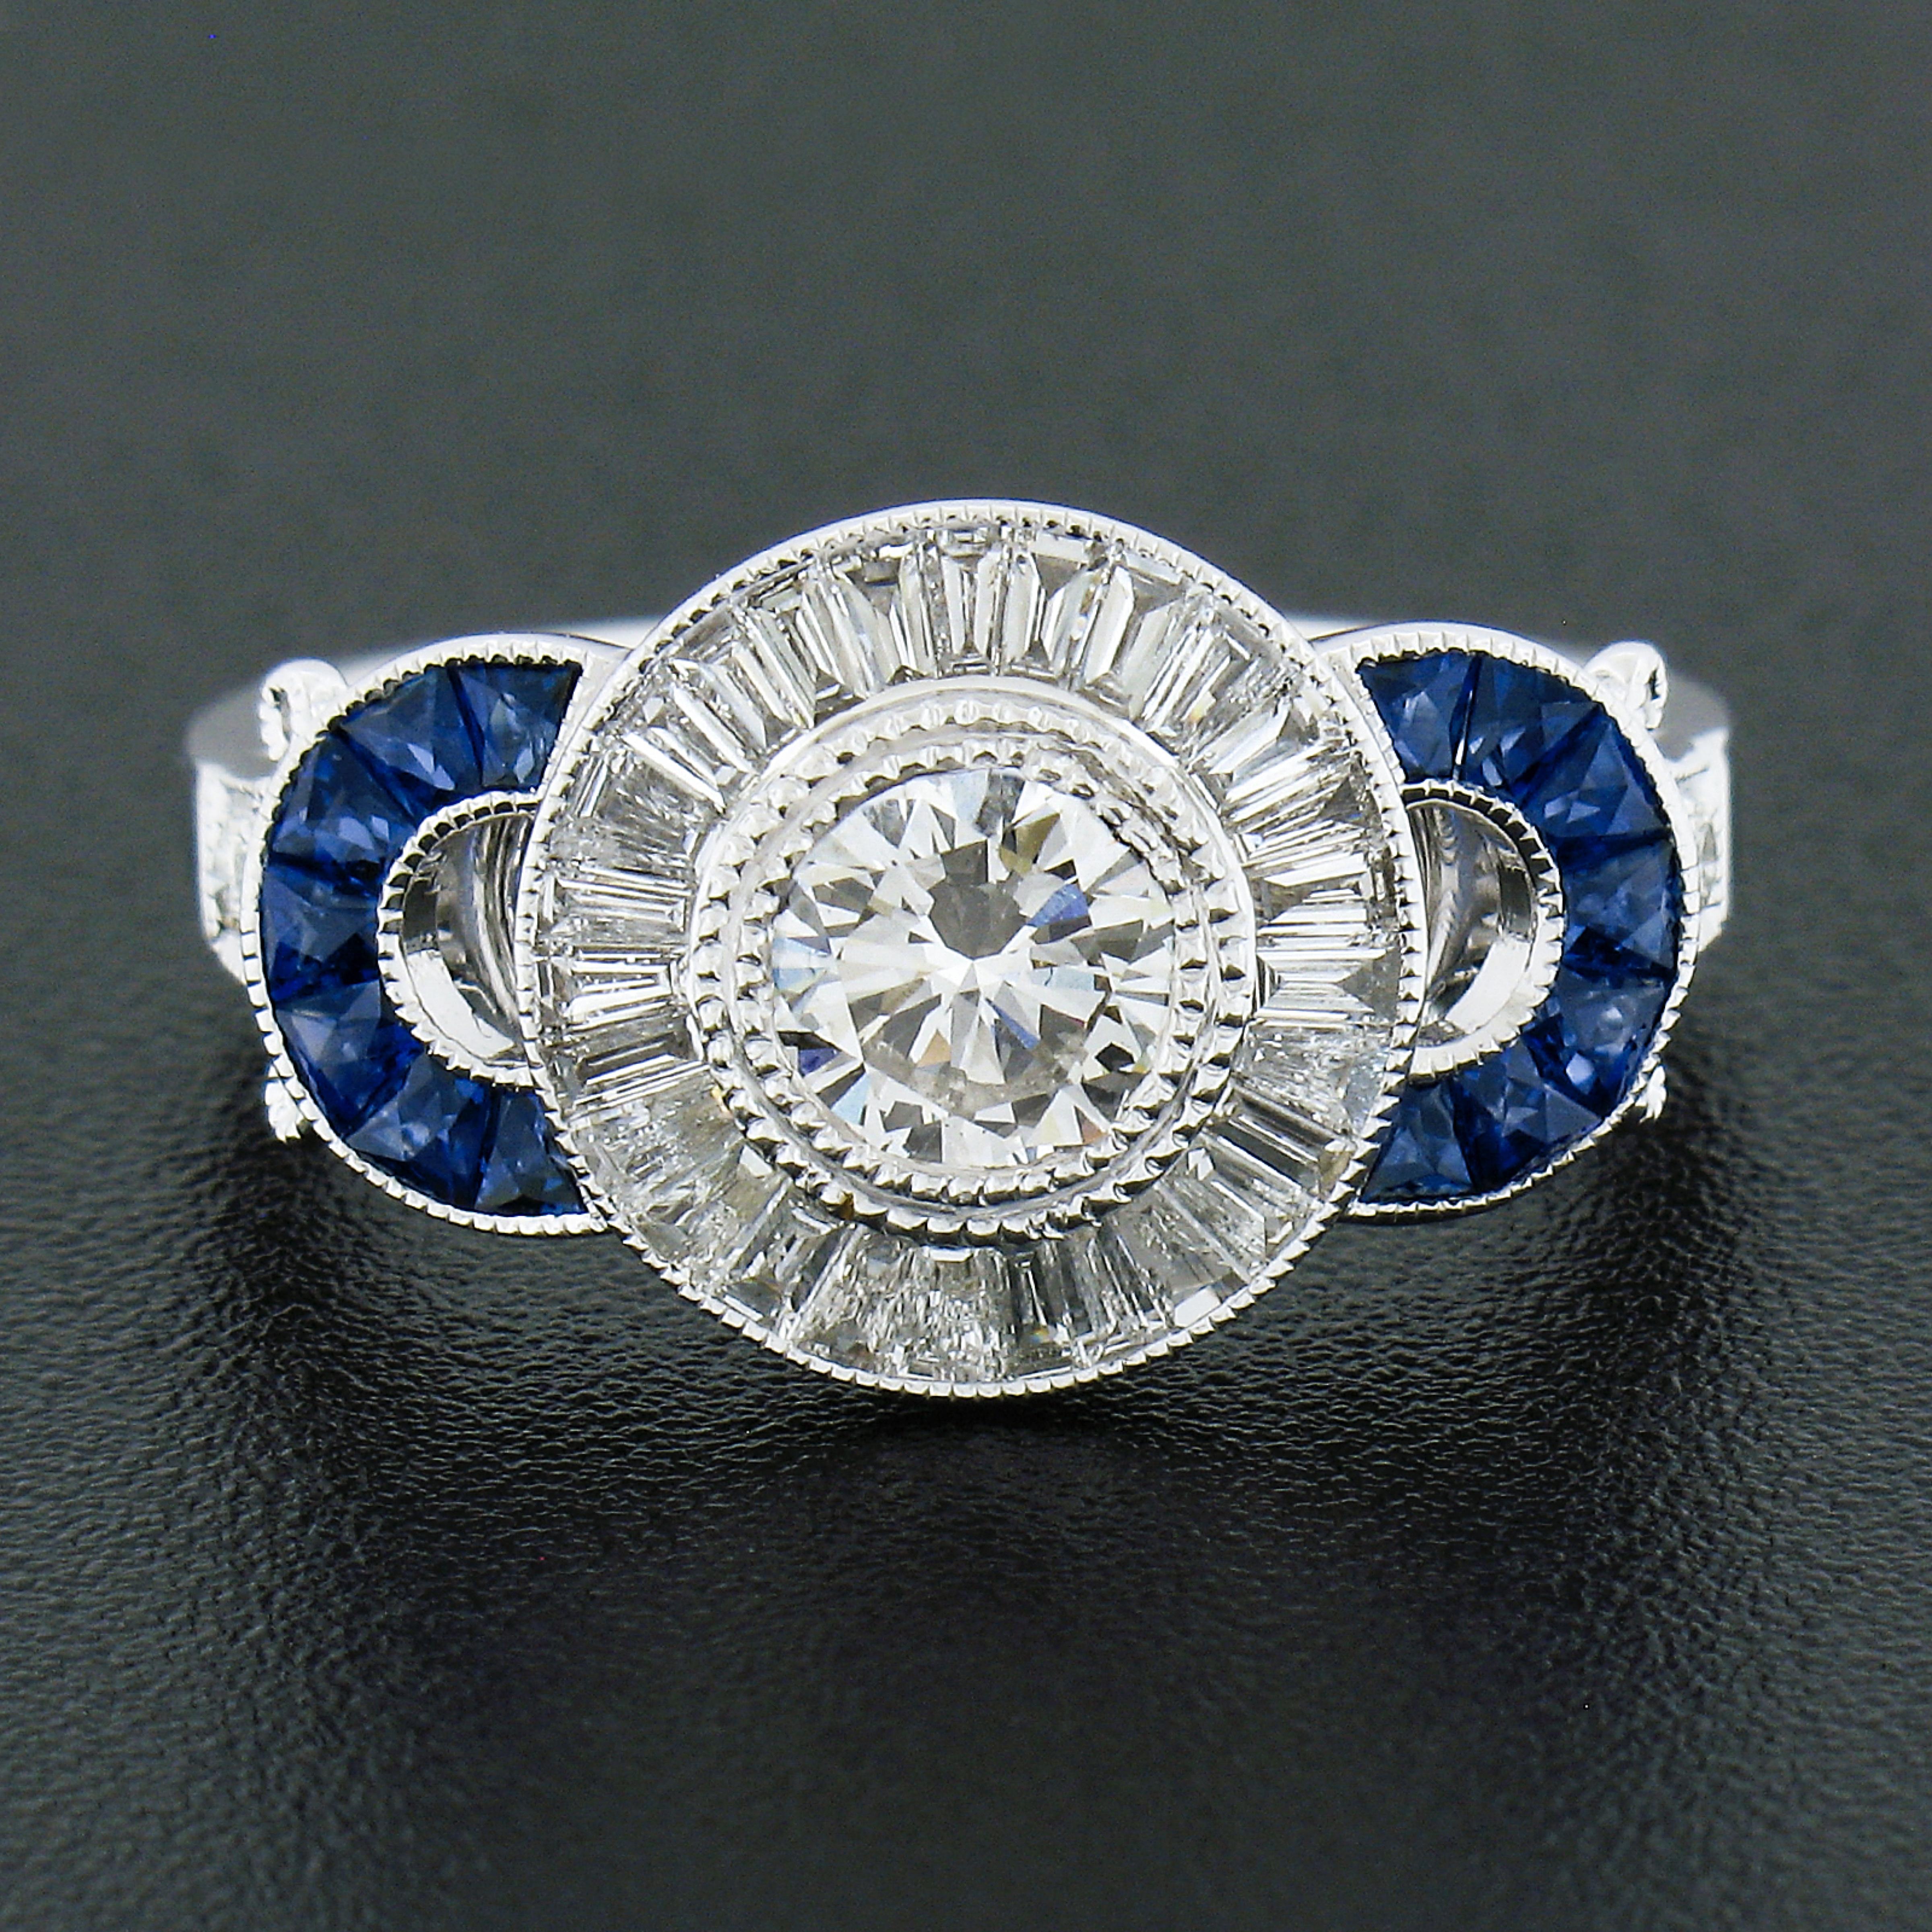 Here we have a brand new and absolutely breathtaking diamond and sapphire ring that was crafted from solid 18k white gold. This very well made ring features a stunning, GIA certified, round brilliant cut diamond neatly set at the center in a doubled